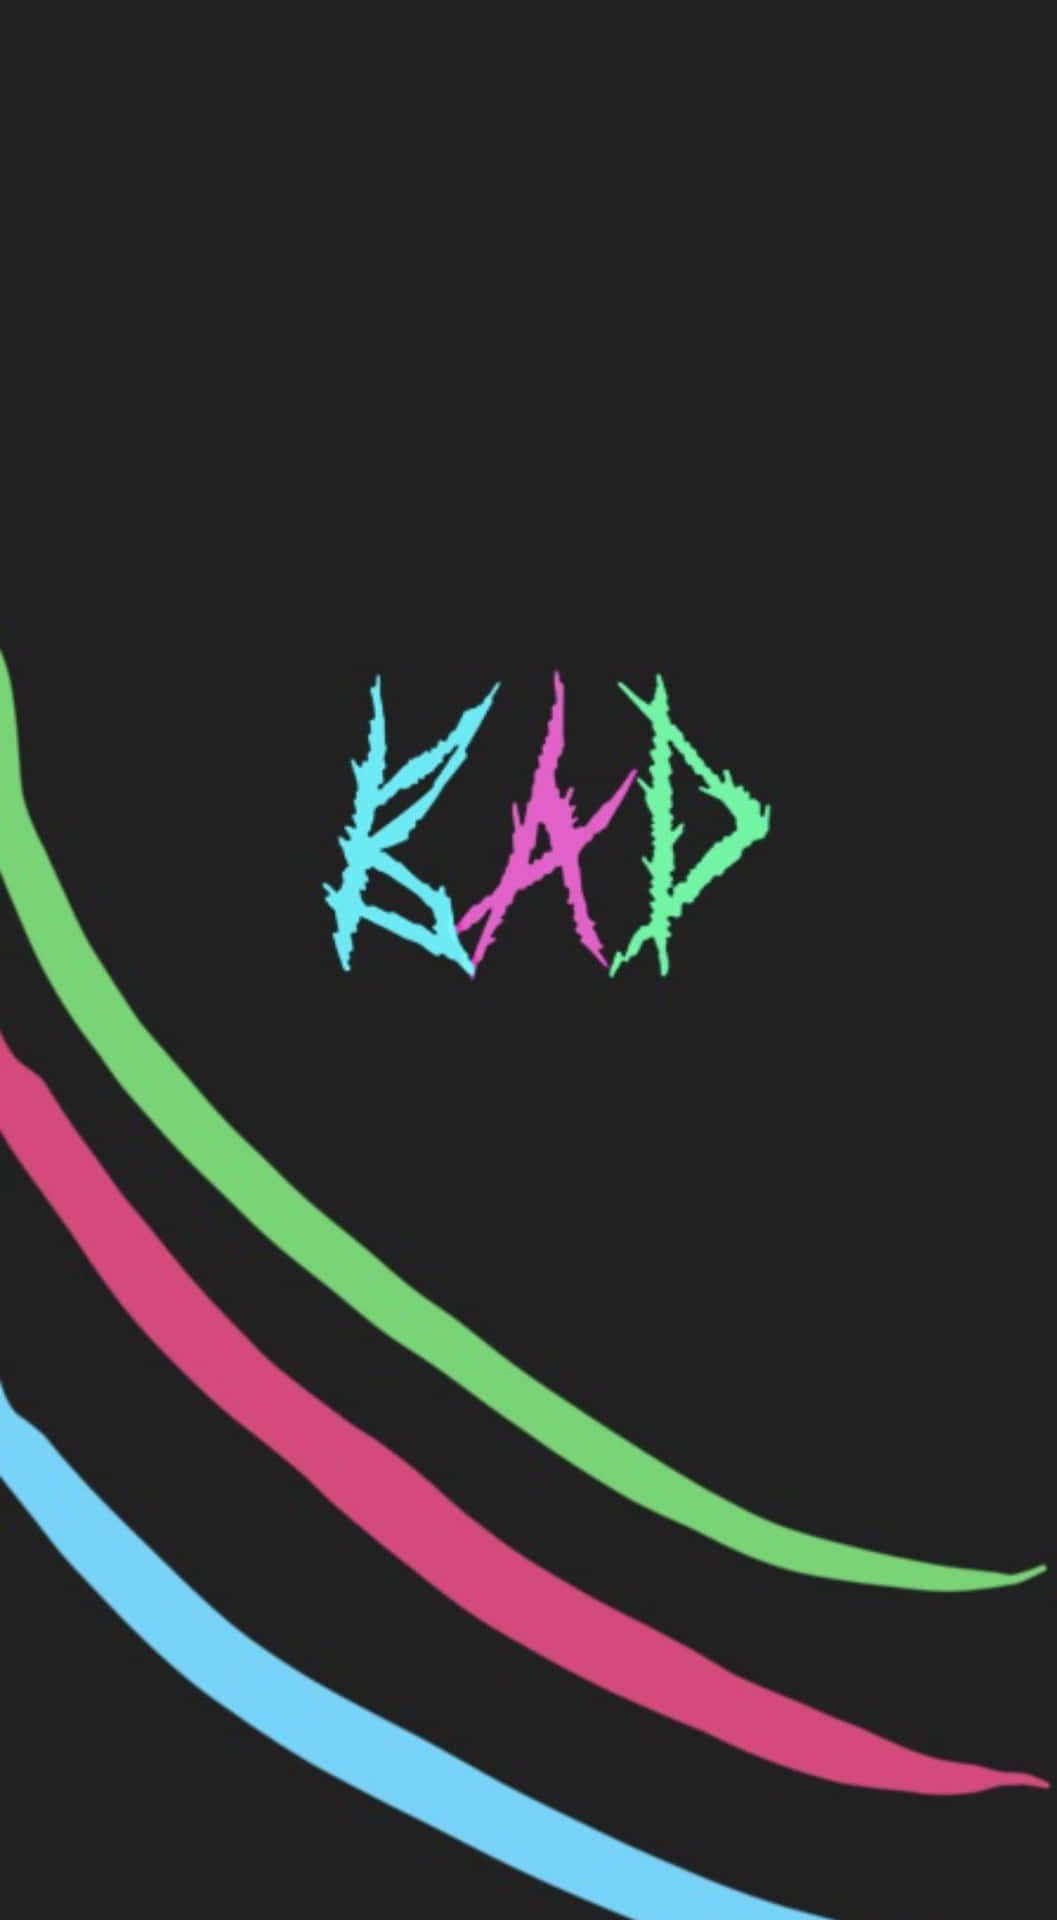 Green With Pink And Blue Xxxtentacion Bad Wallpaper